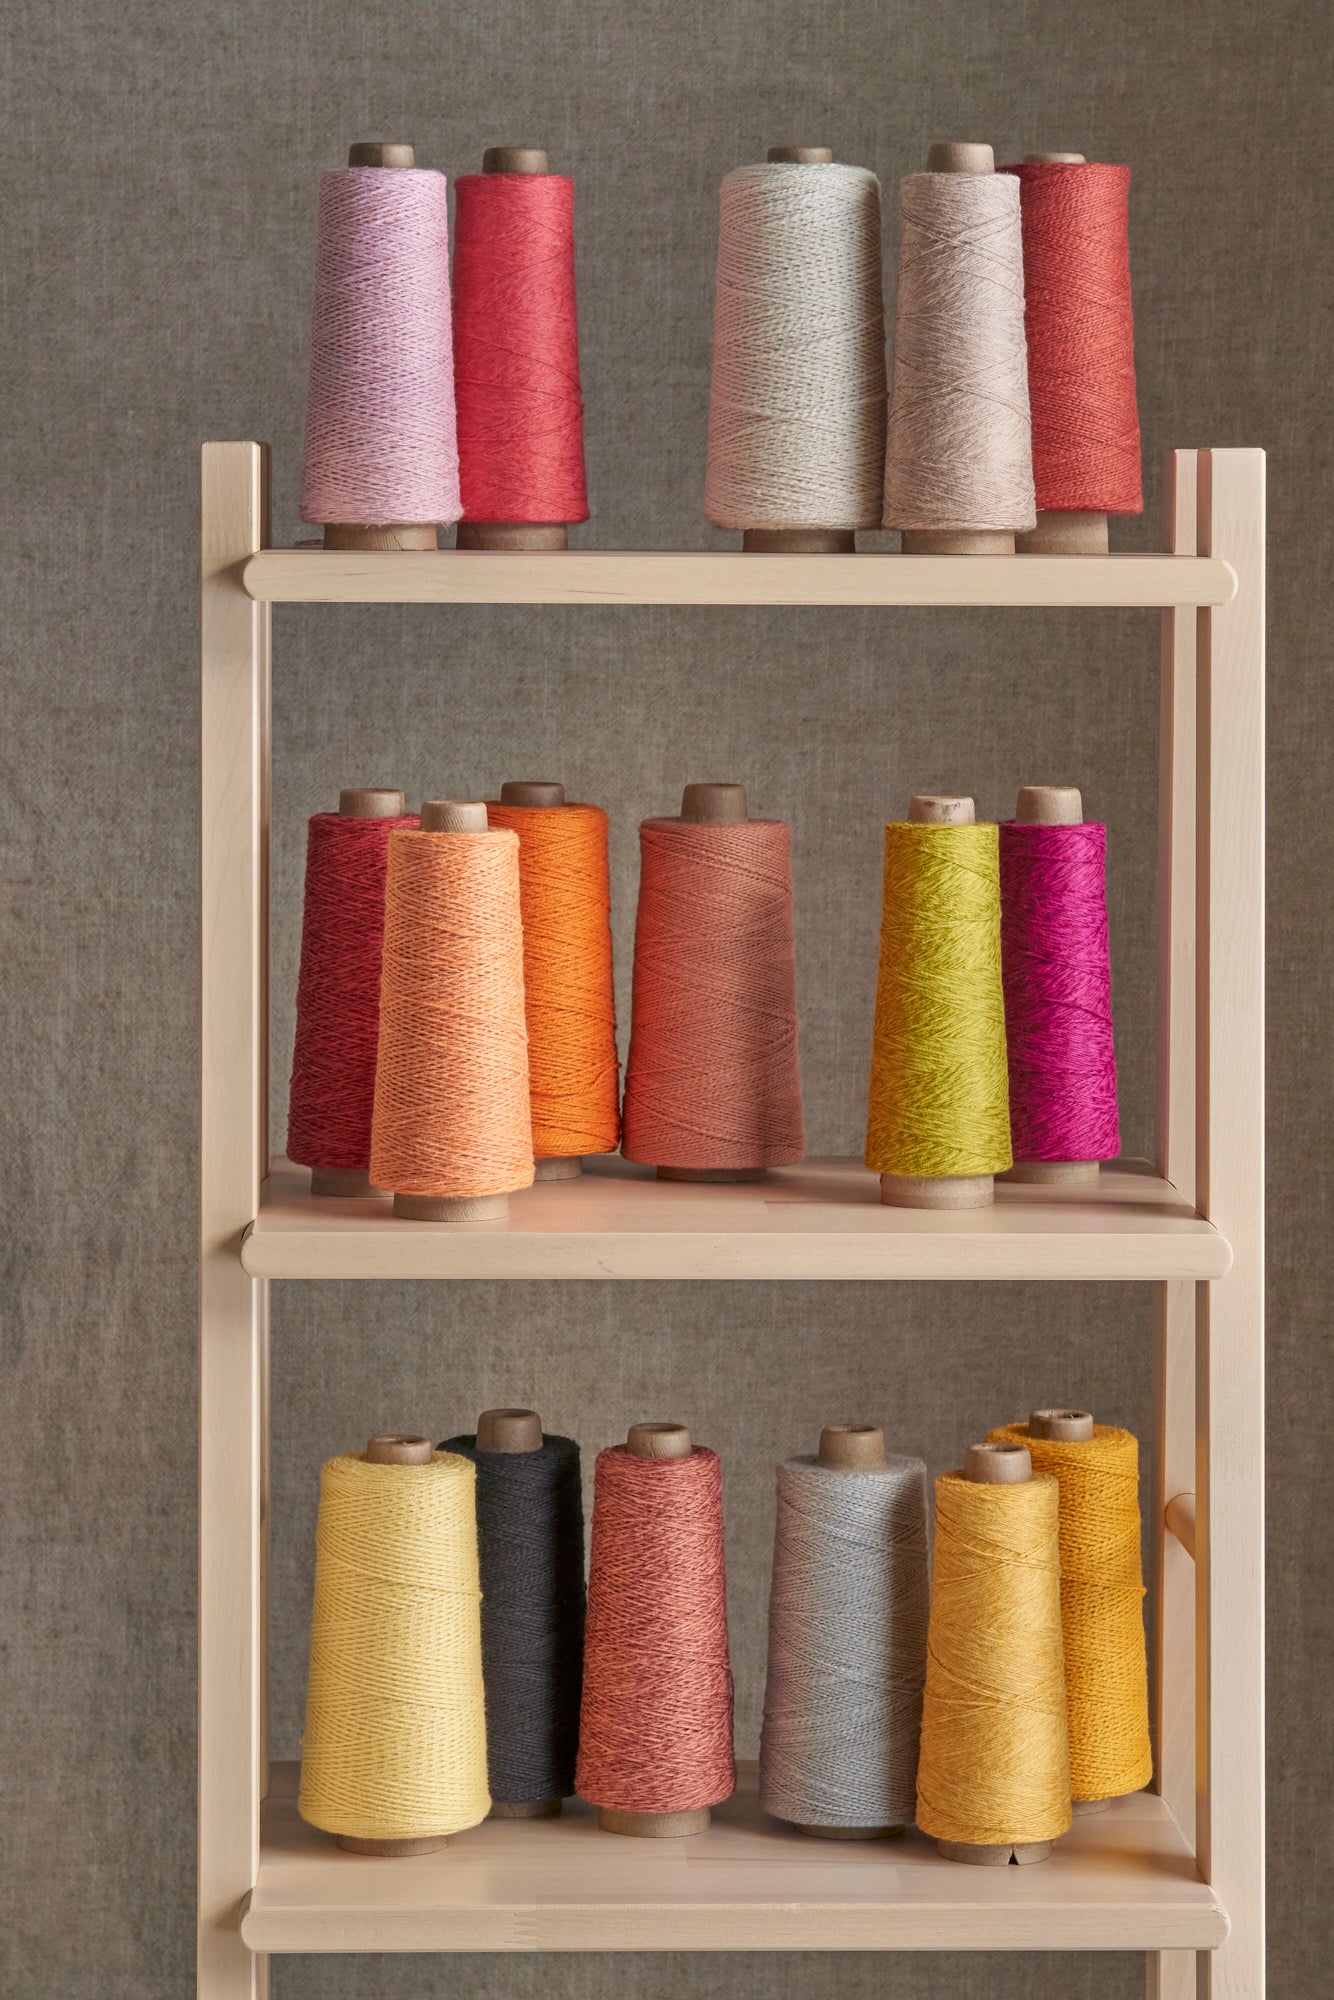 An array of warm toned rolls of threads set on a wooden shelf against a gray background.